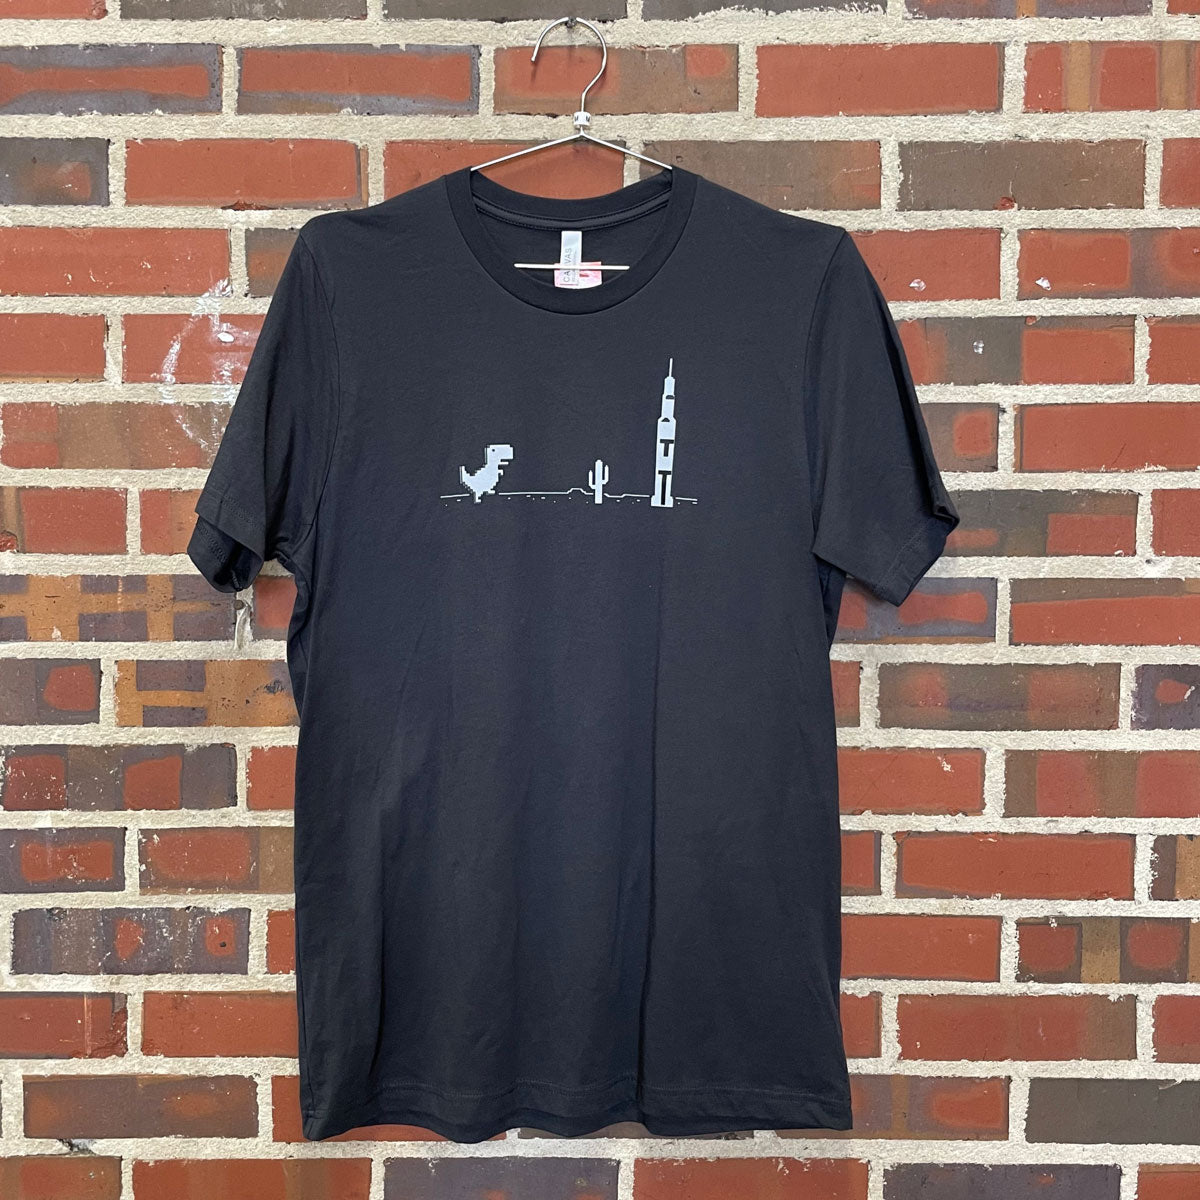 Internet dinosaur from a classic no internet game with the Saturn V rocket design on a T-Shirt against a brick wall